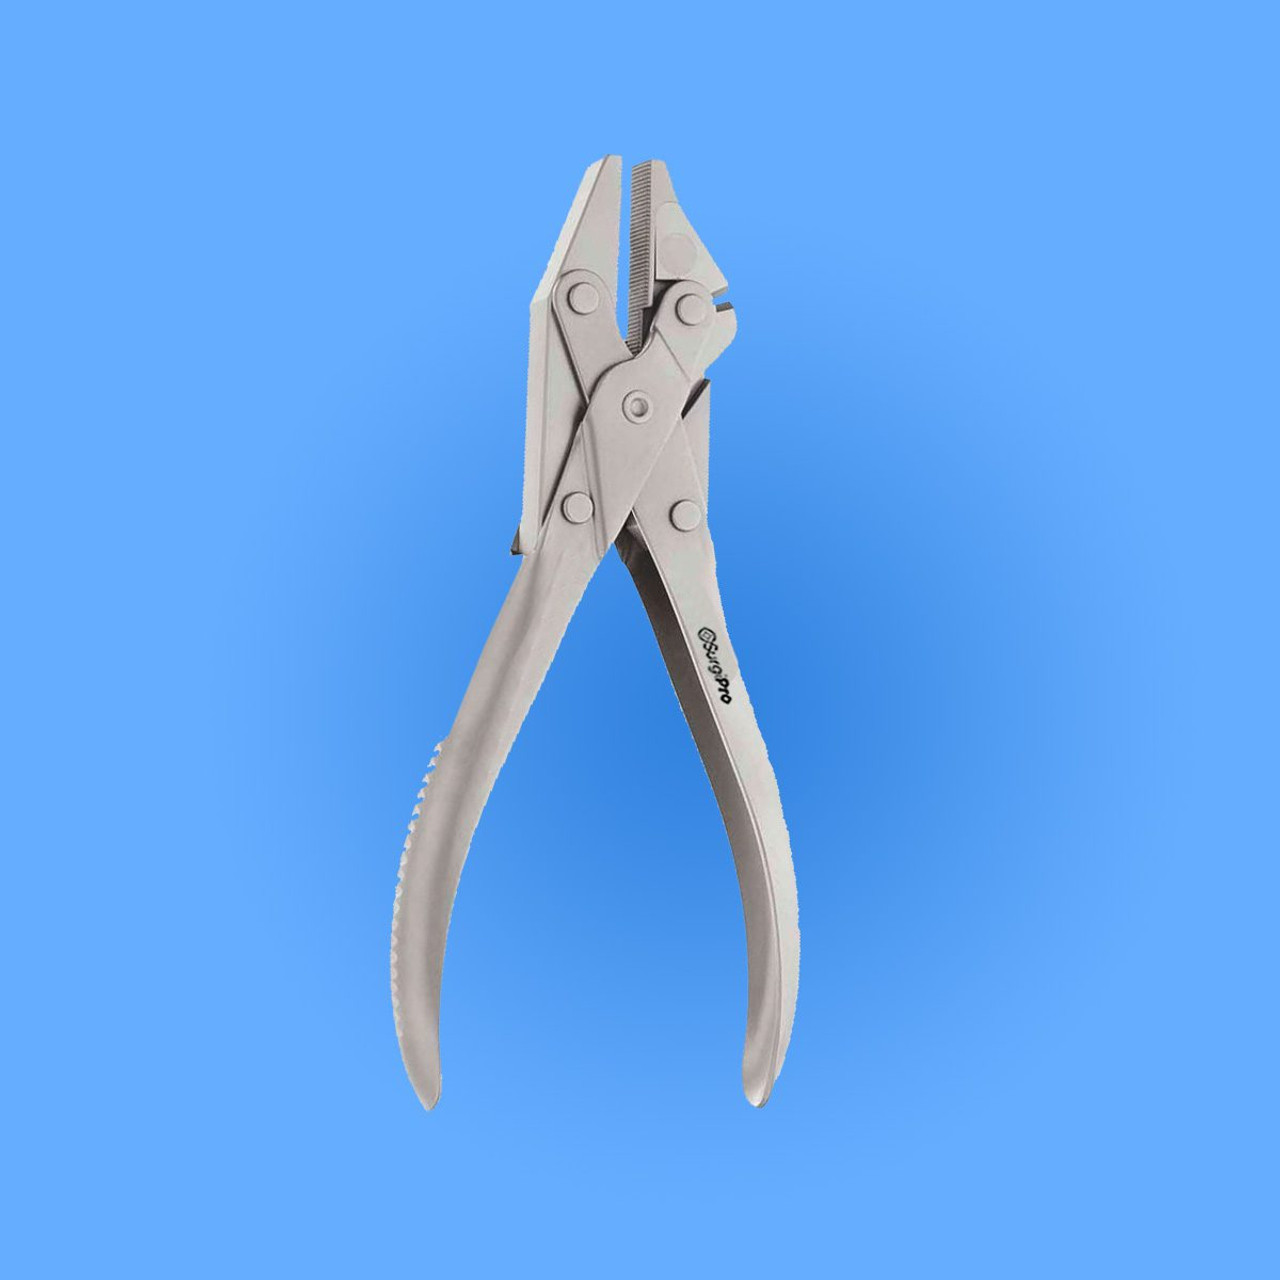 Double Action Parallel Surgical Pliers and Wire Cutter - SPSS-017